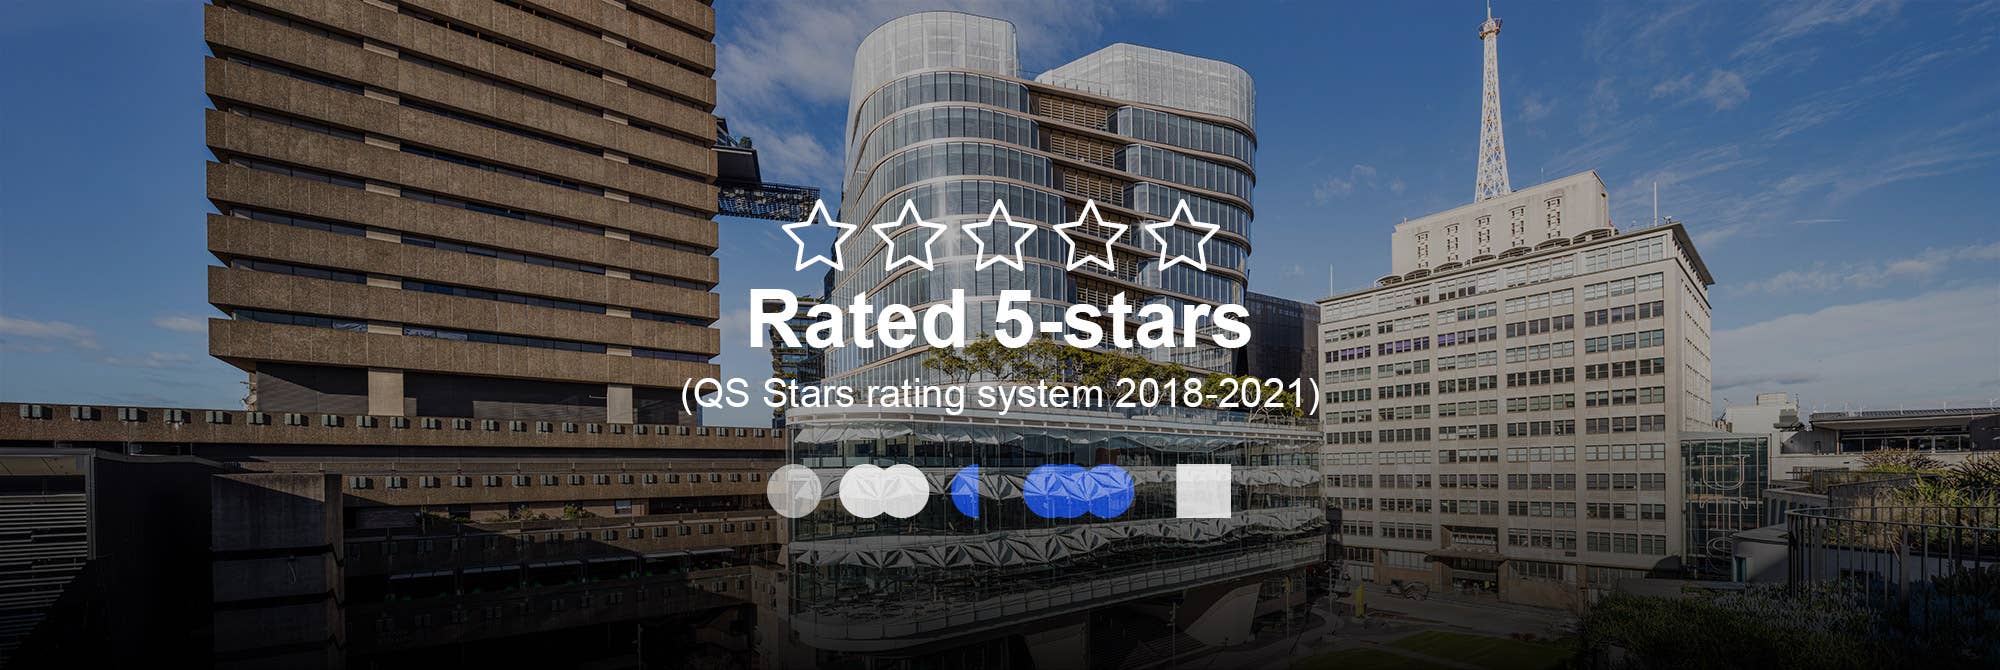 Rated 5-stars